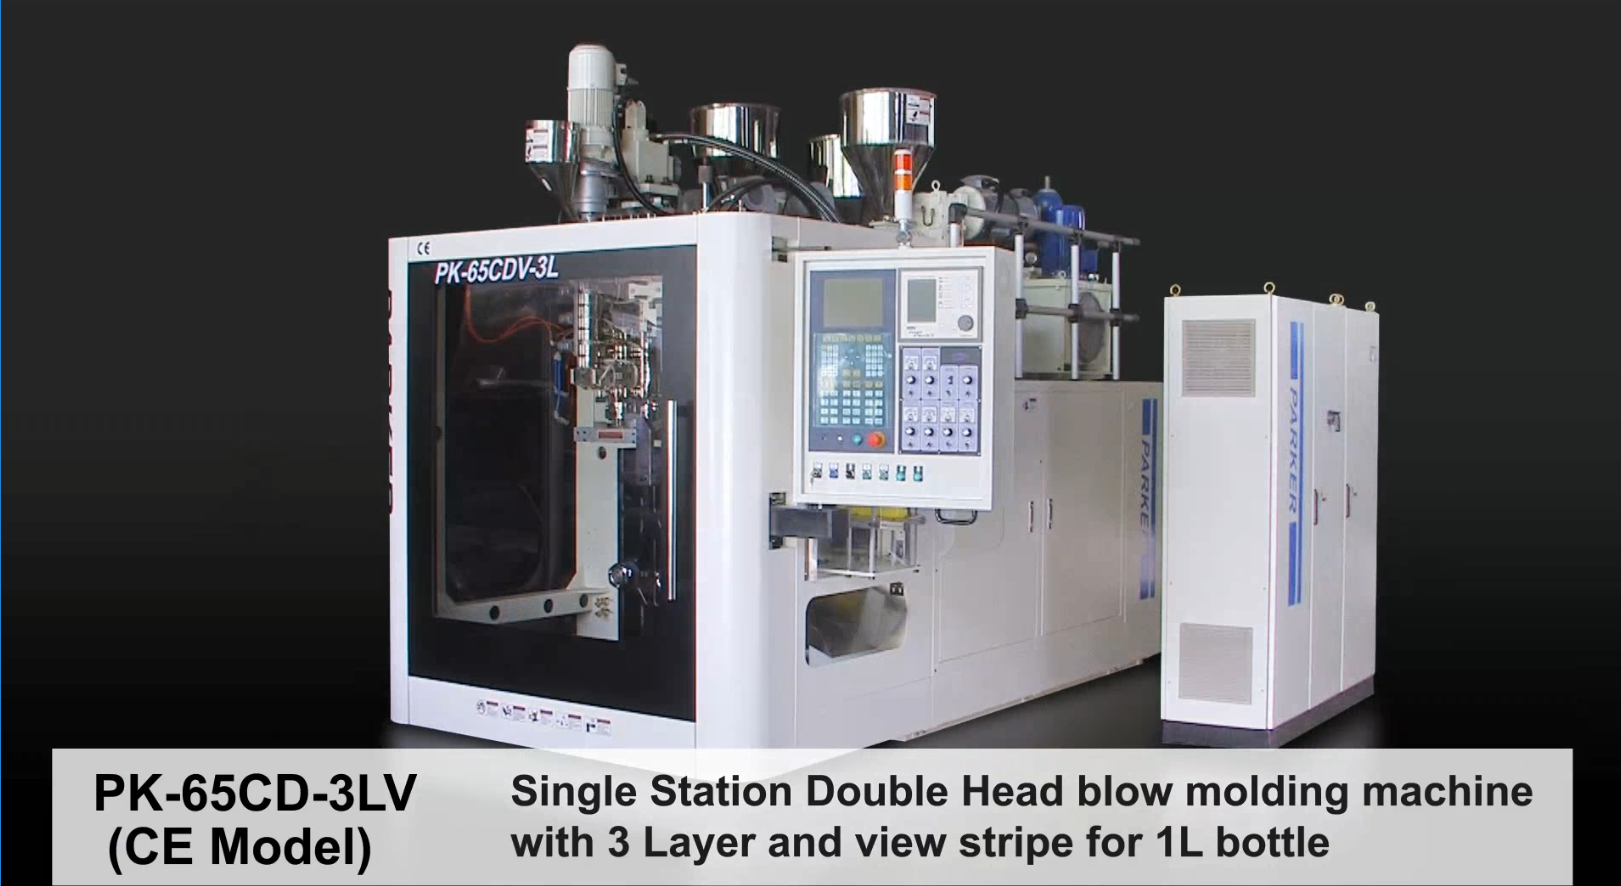 3 Layer Single Station Double Head with View Stripe Blow Molding Machine-PK-65CD3LV(PE)(CE model)